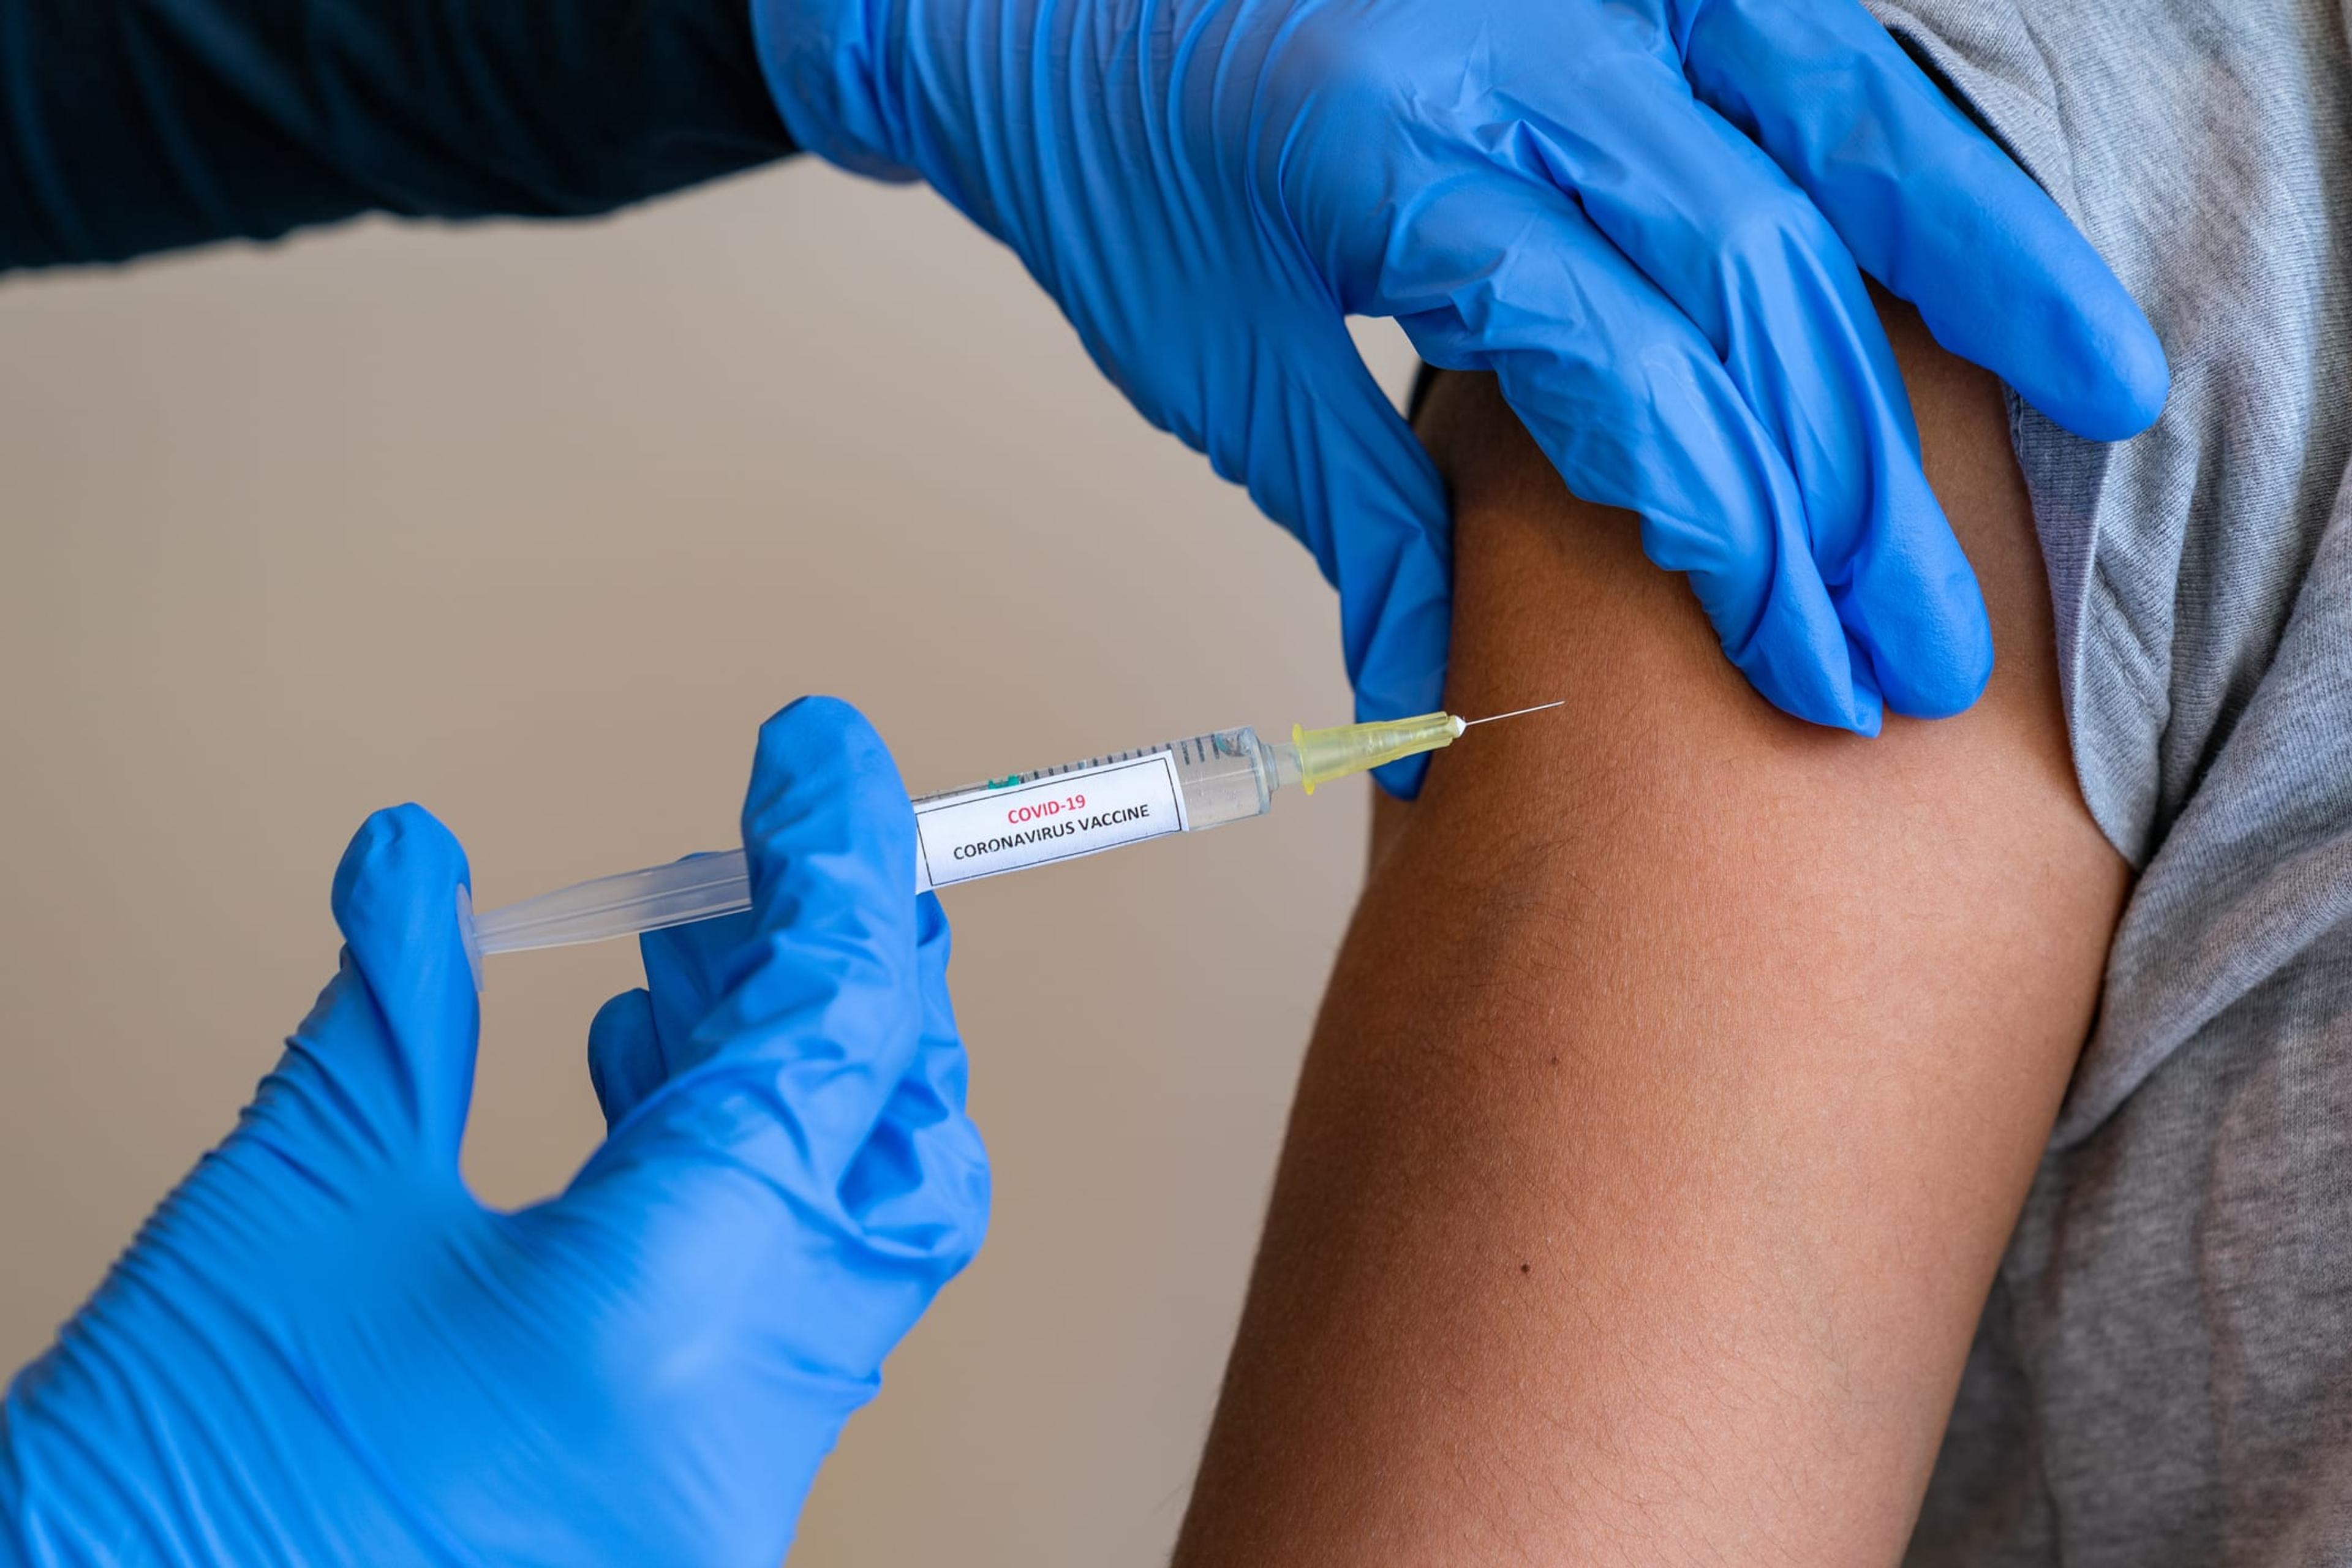 Female doctor wearing blue latex gloves injecting female with a needle and syringe containing a dose of the COVID-19 vaccine.